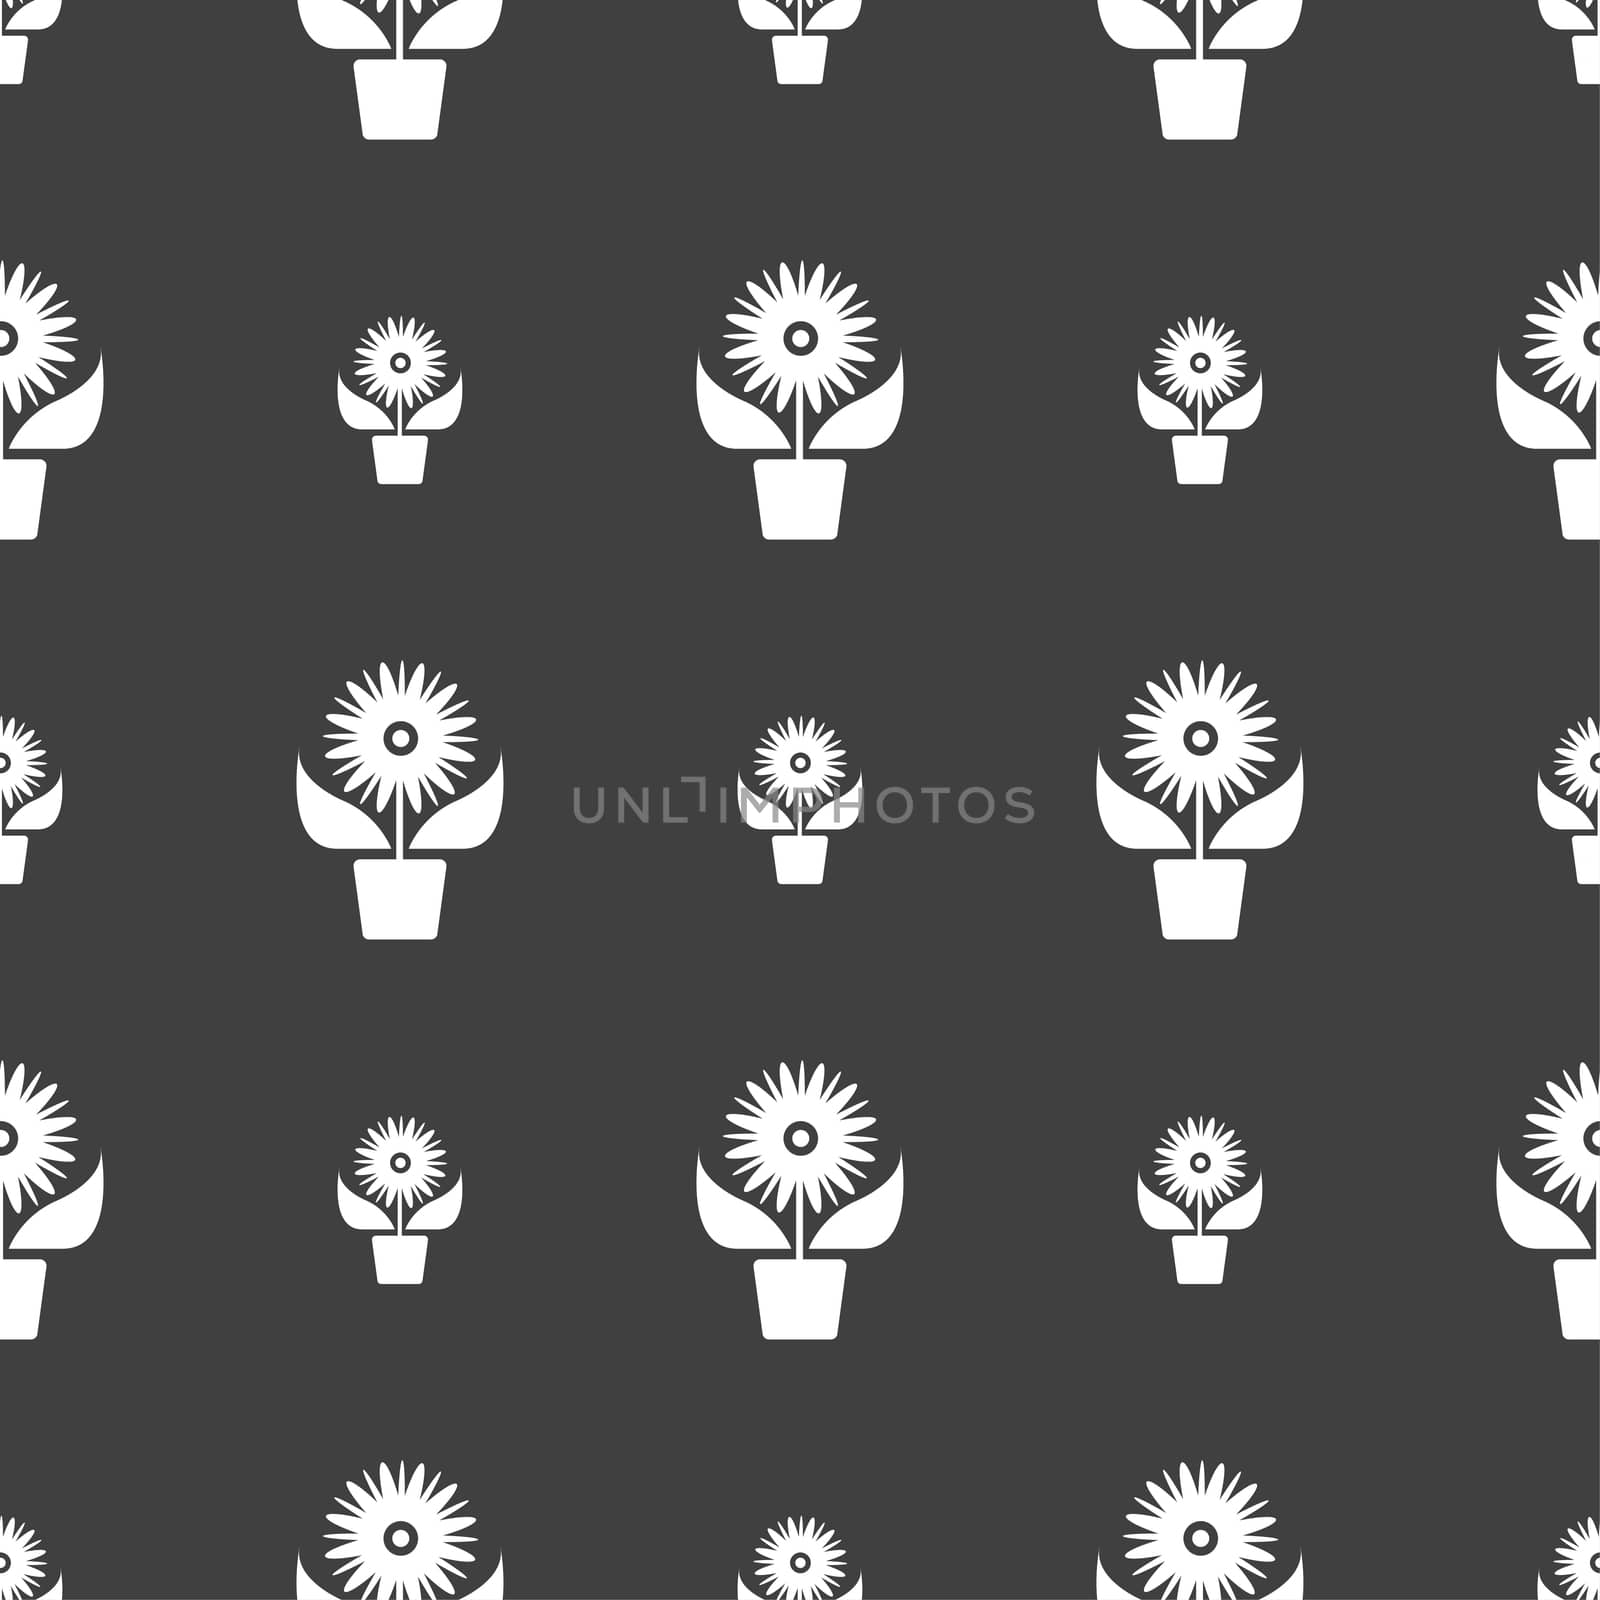 Flowers in pot icon sign. Seamless pattern on a gray background. illustration